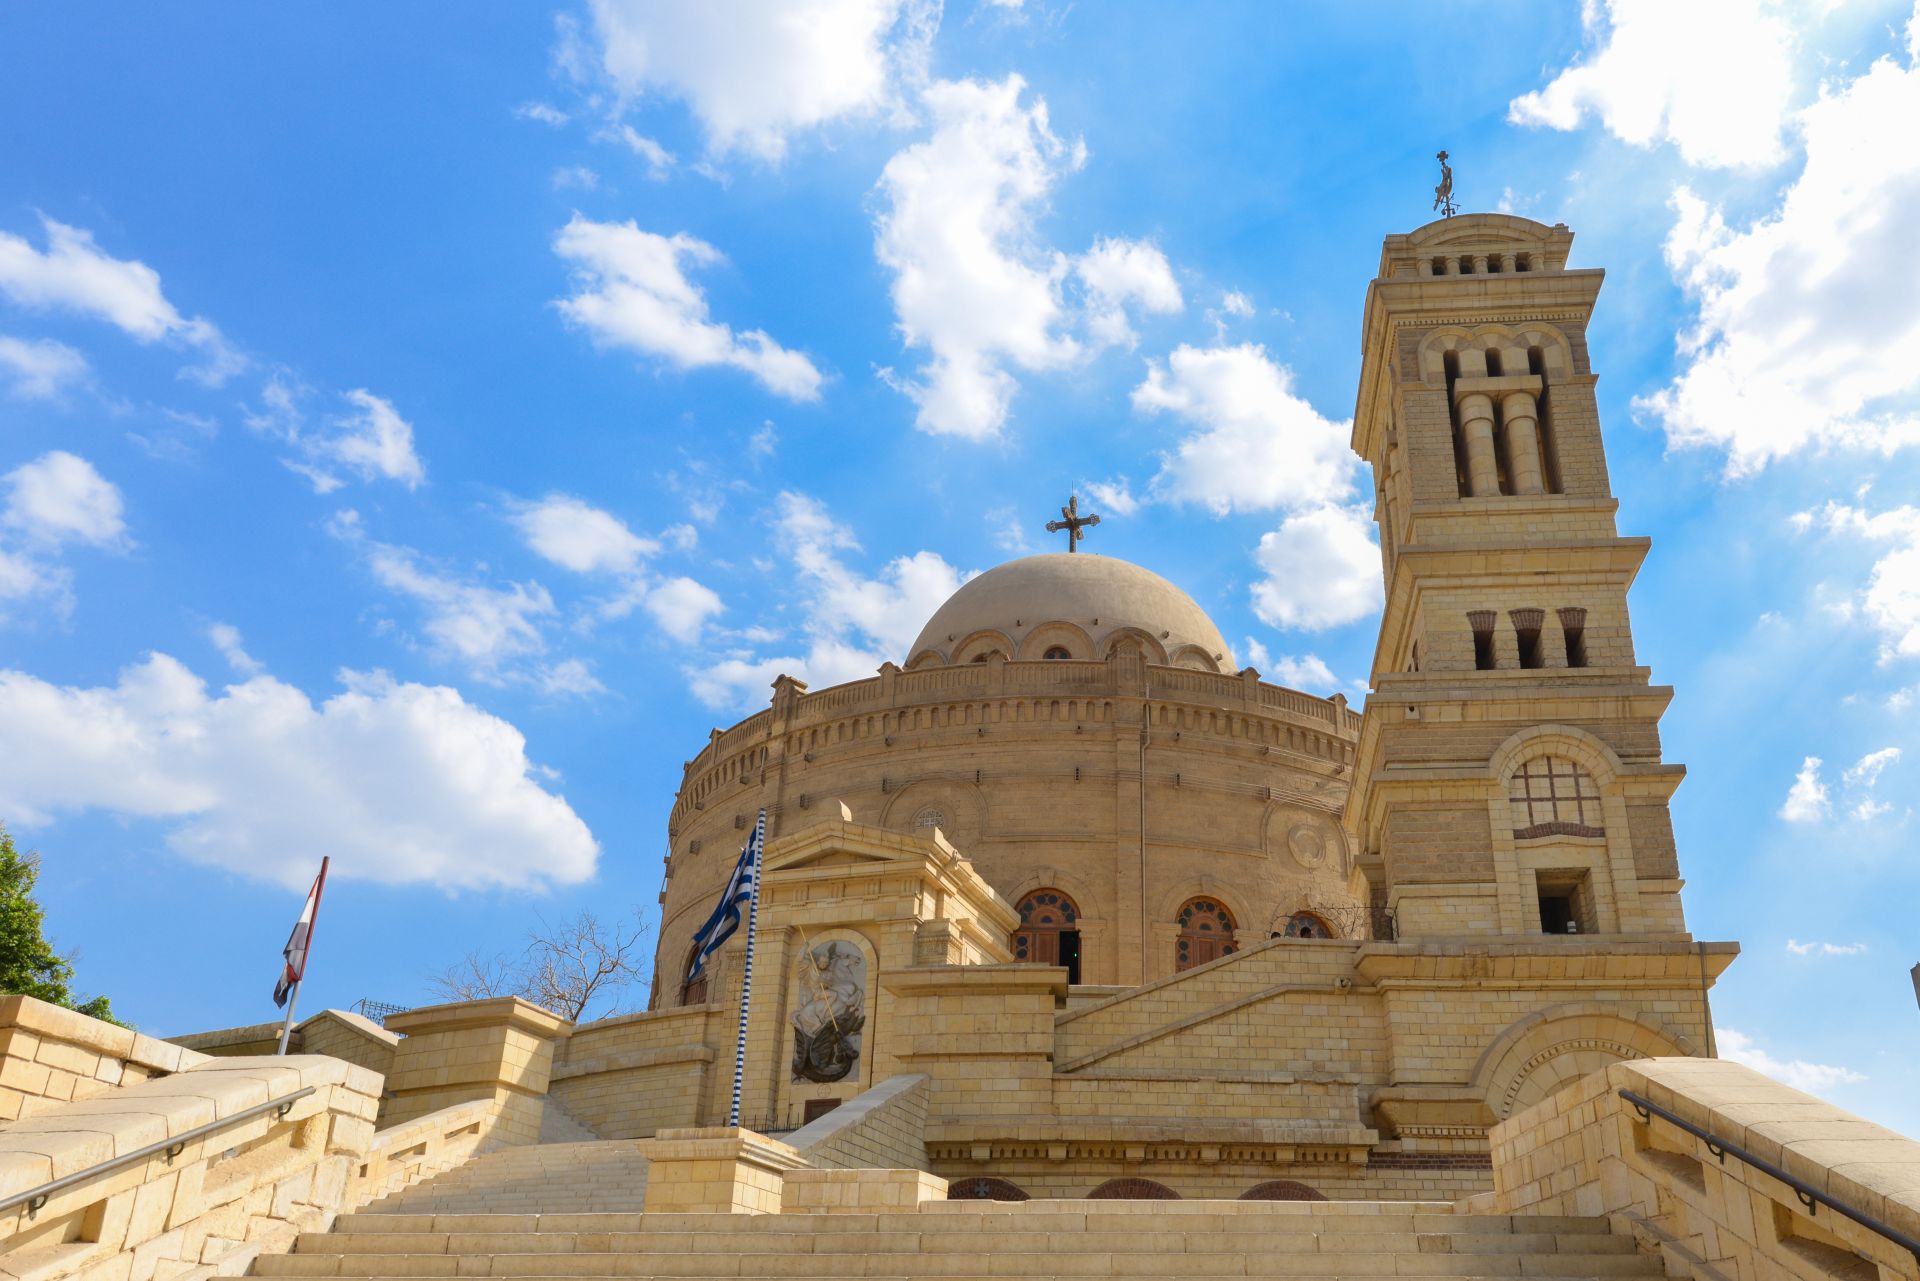 EGYPT The Church of Saint George in Coptic Cairo